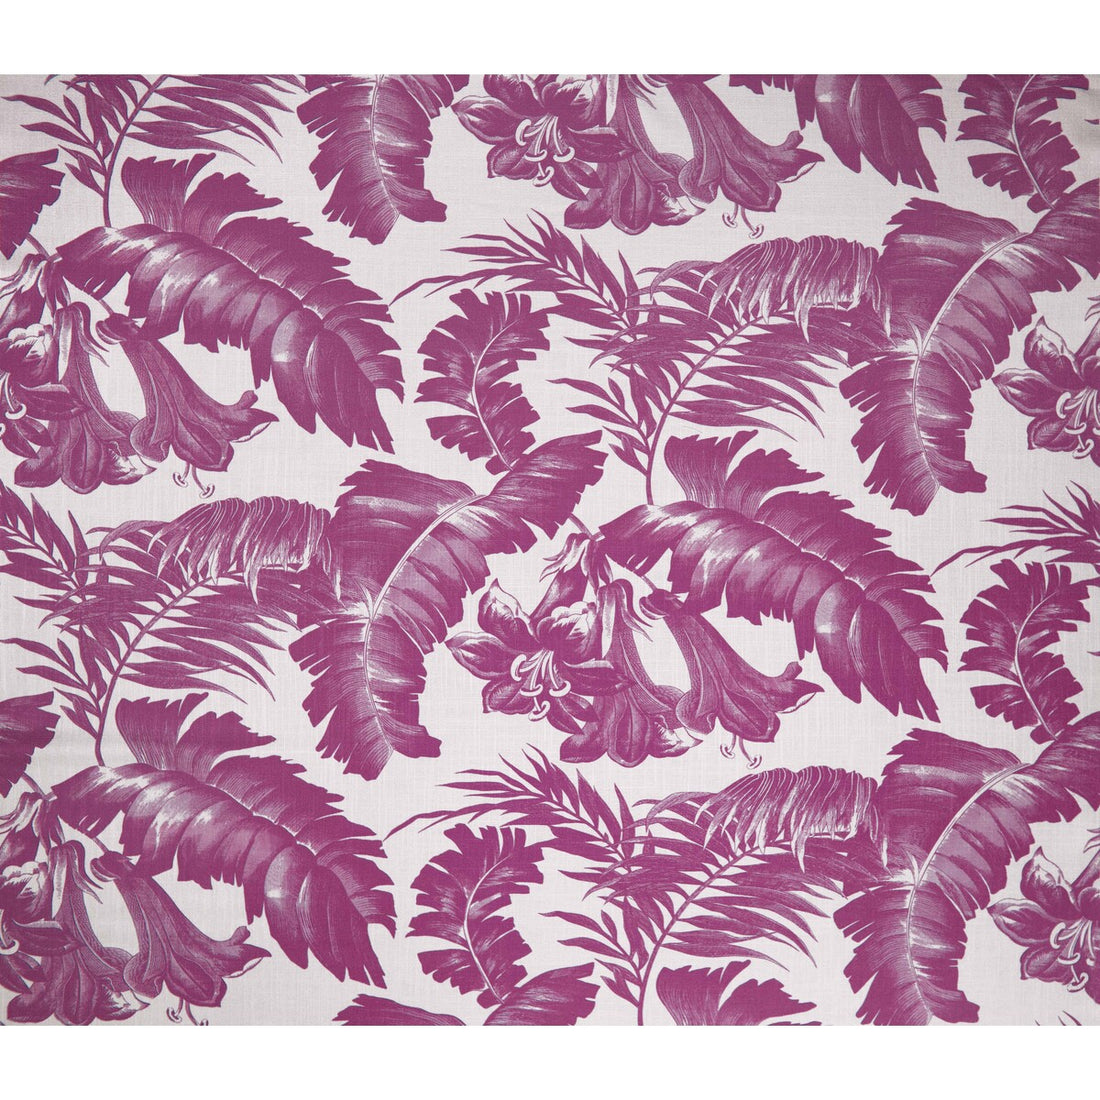 Plantation fabric in frambuesa color - pattern GDT5401.4.0 - by Gaston y Daniela in the Gaston Africalia collection